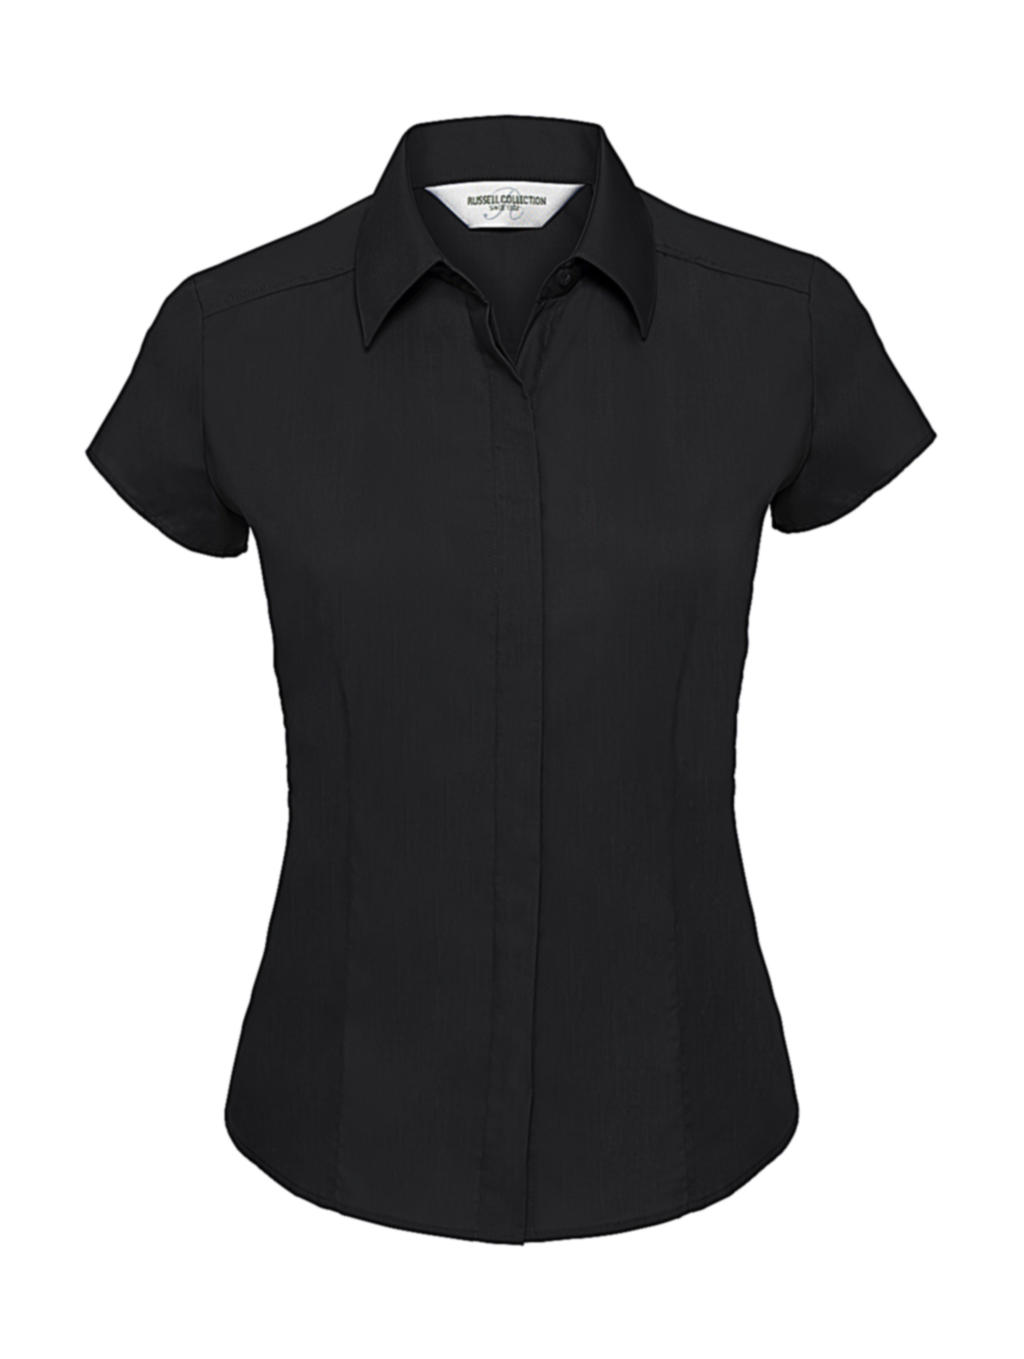  Ladies Fitted Poplin Shirt in Farbe Black